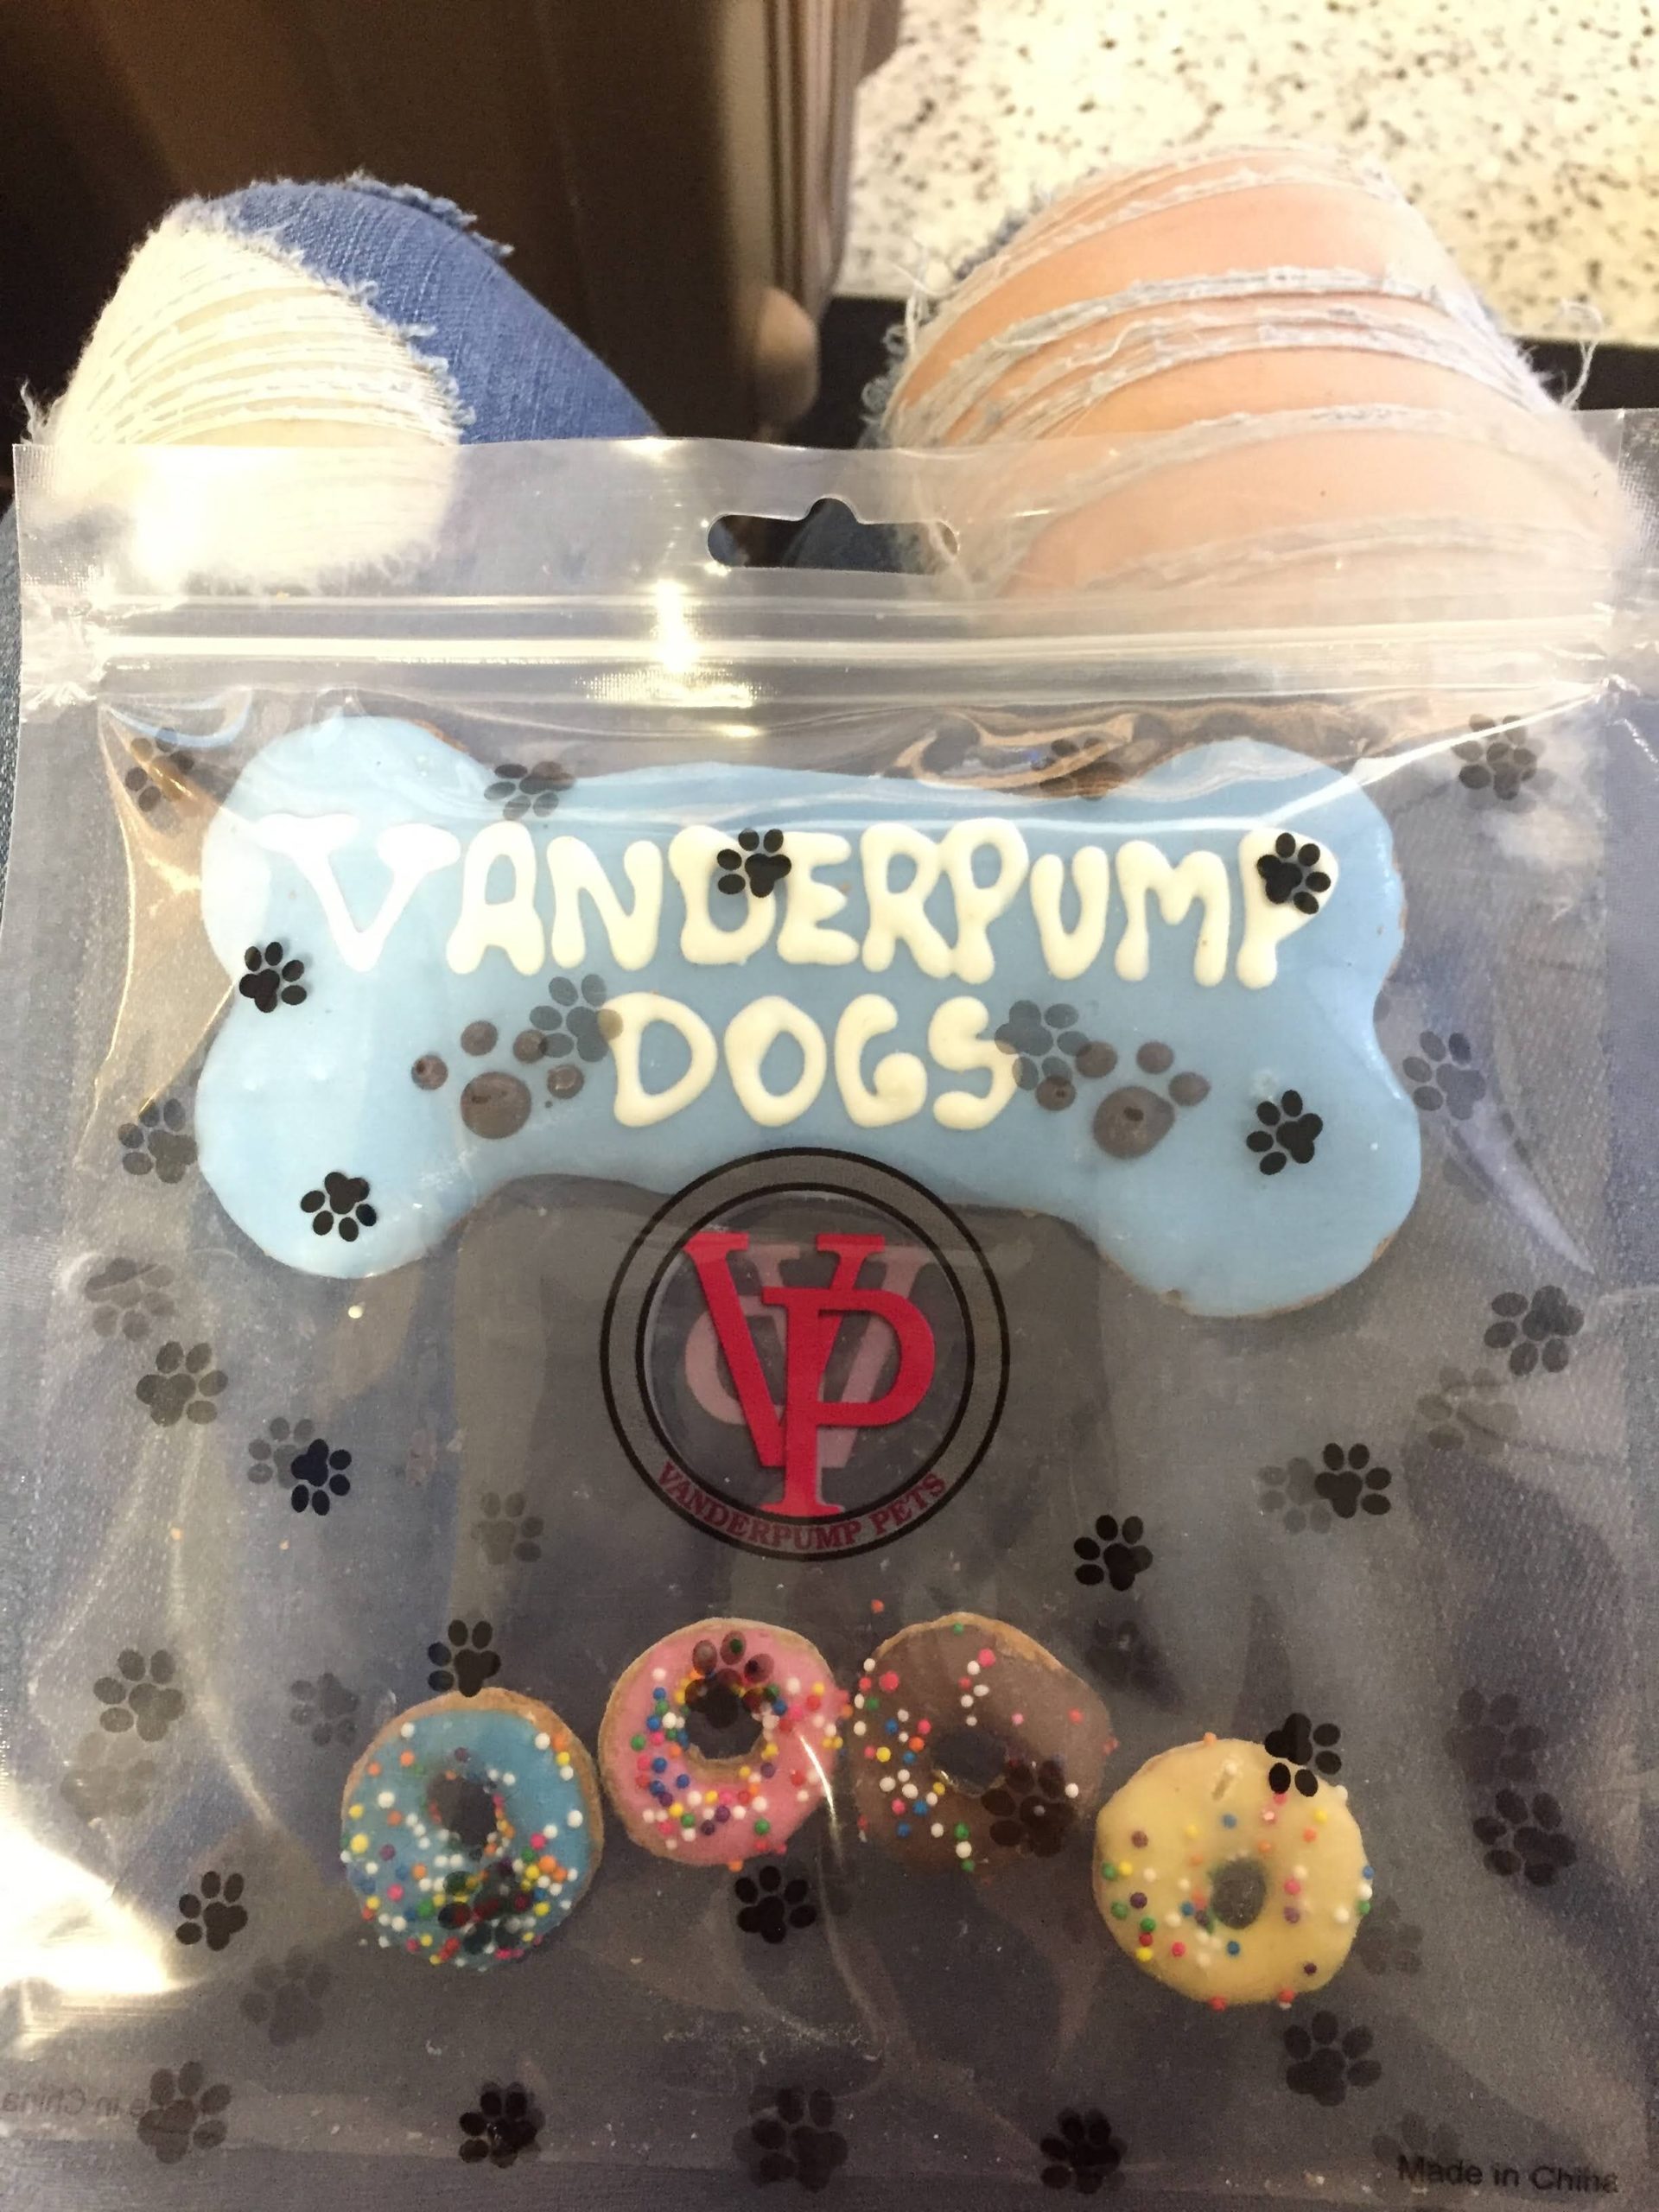 Our dogs loved their Vanderpump Dogs treats!